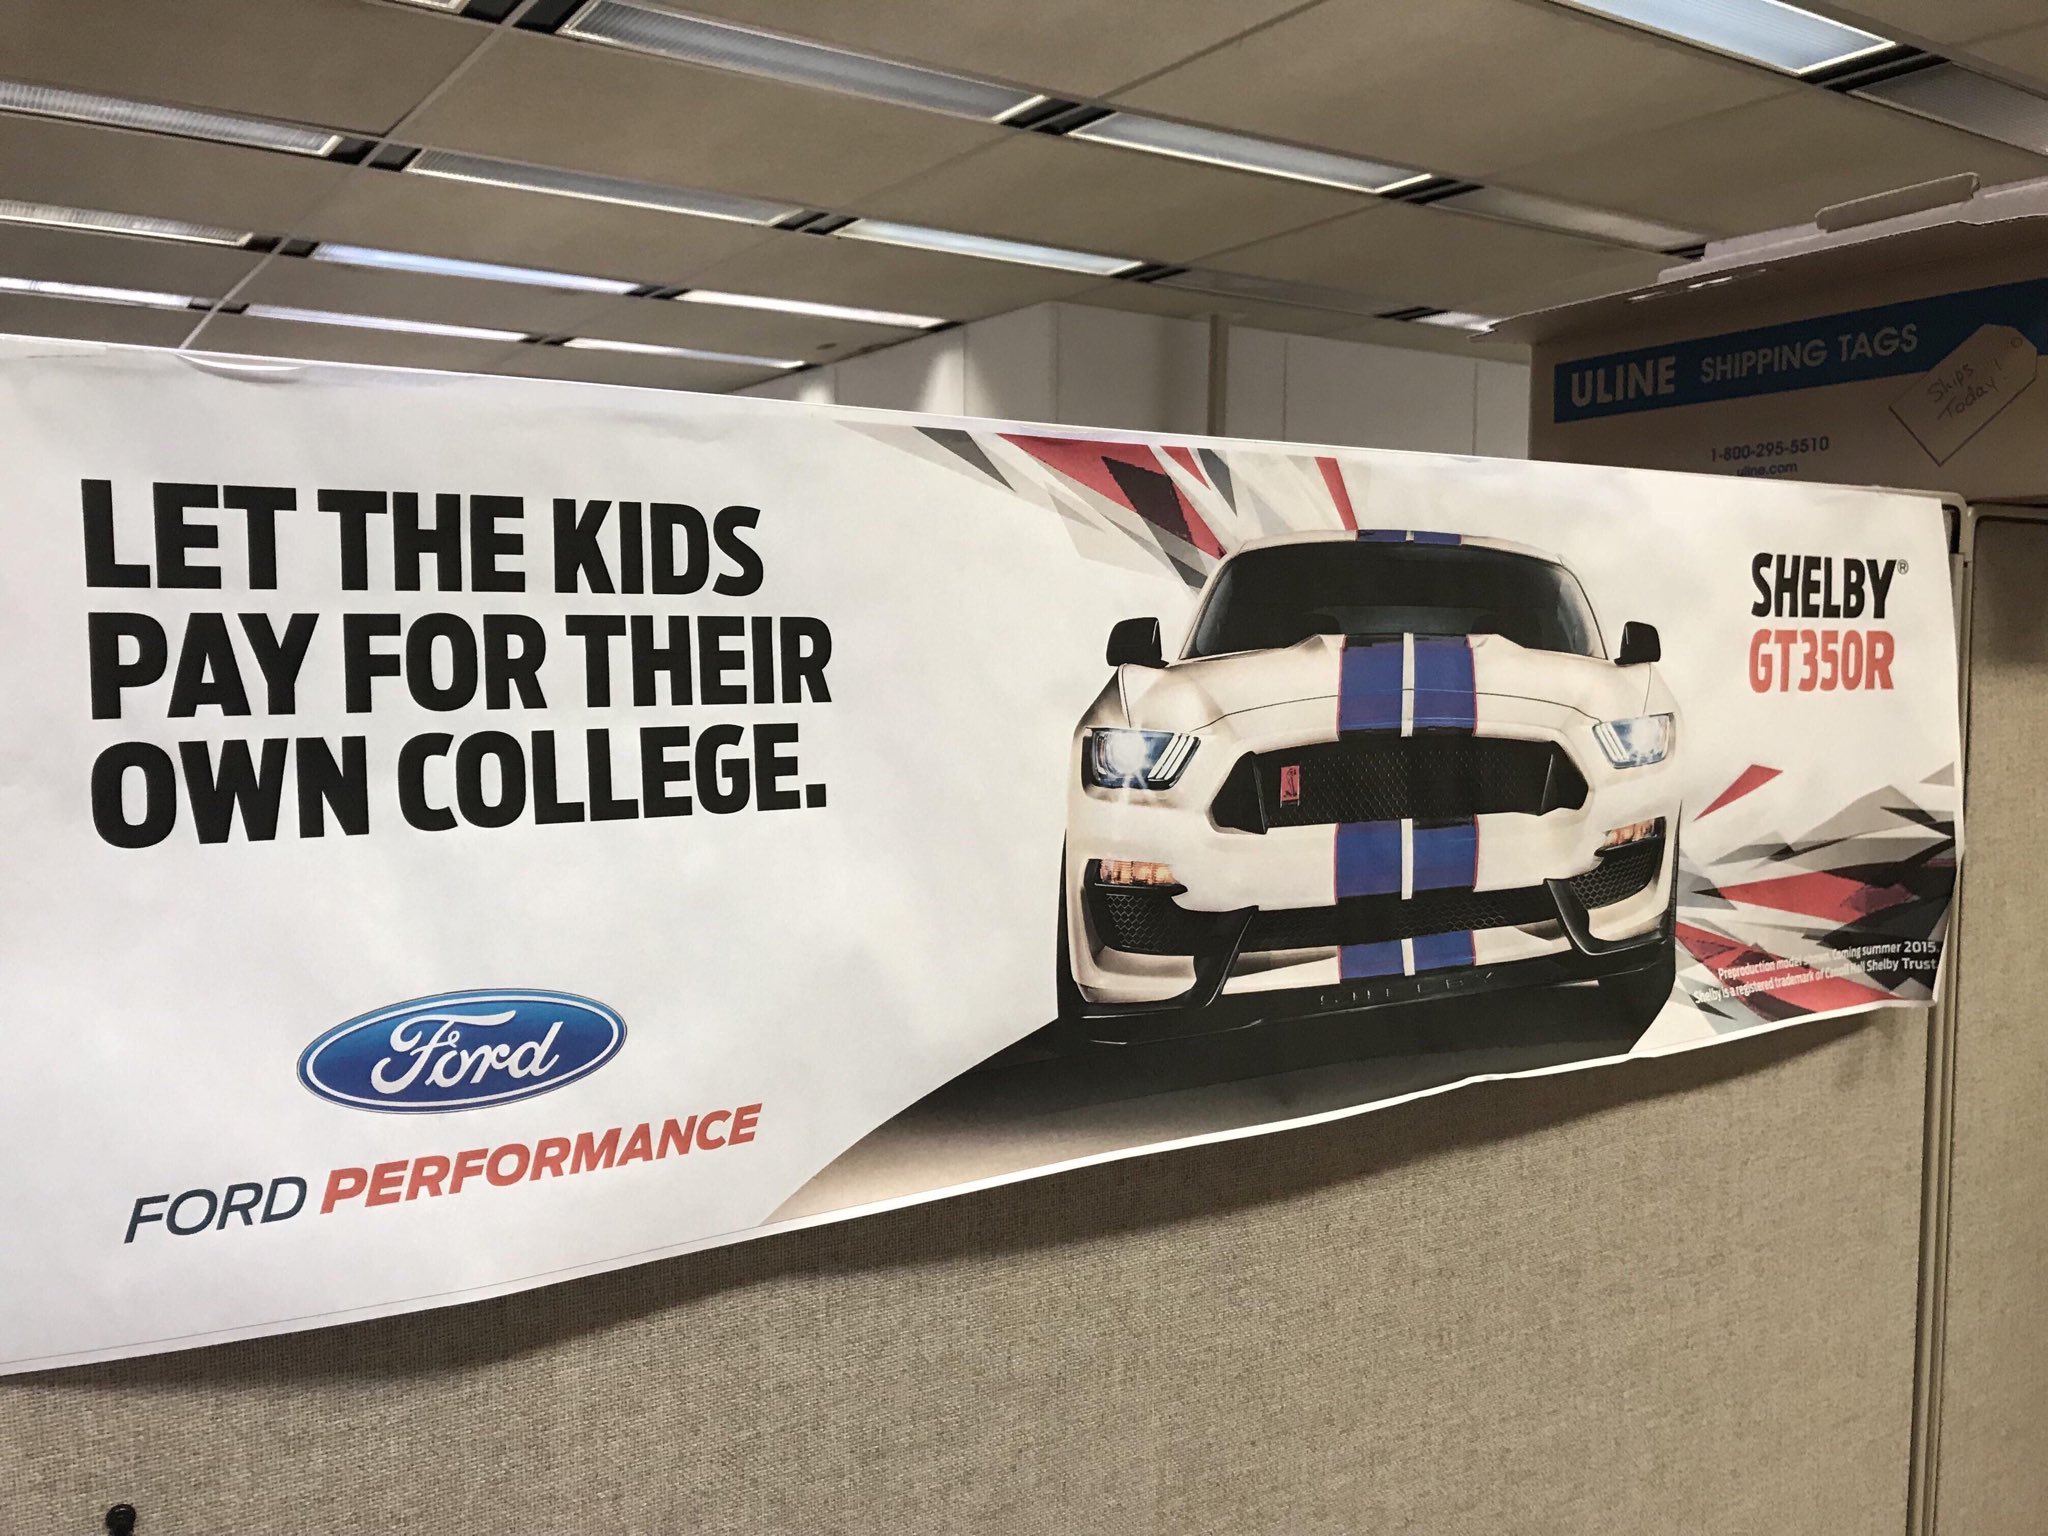 let the kids pay for their own college - Uline Shoping Tags Let The Kids Pay For Their Own College. Shelby GT350R Ford Ford Performance